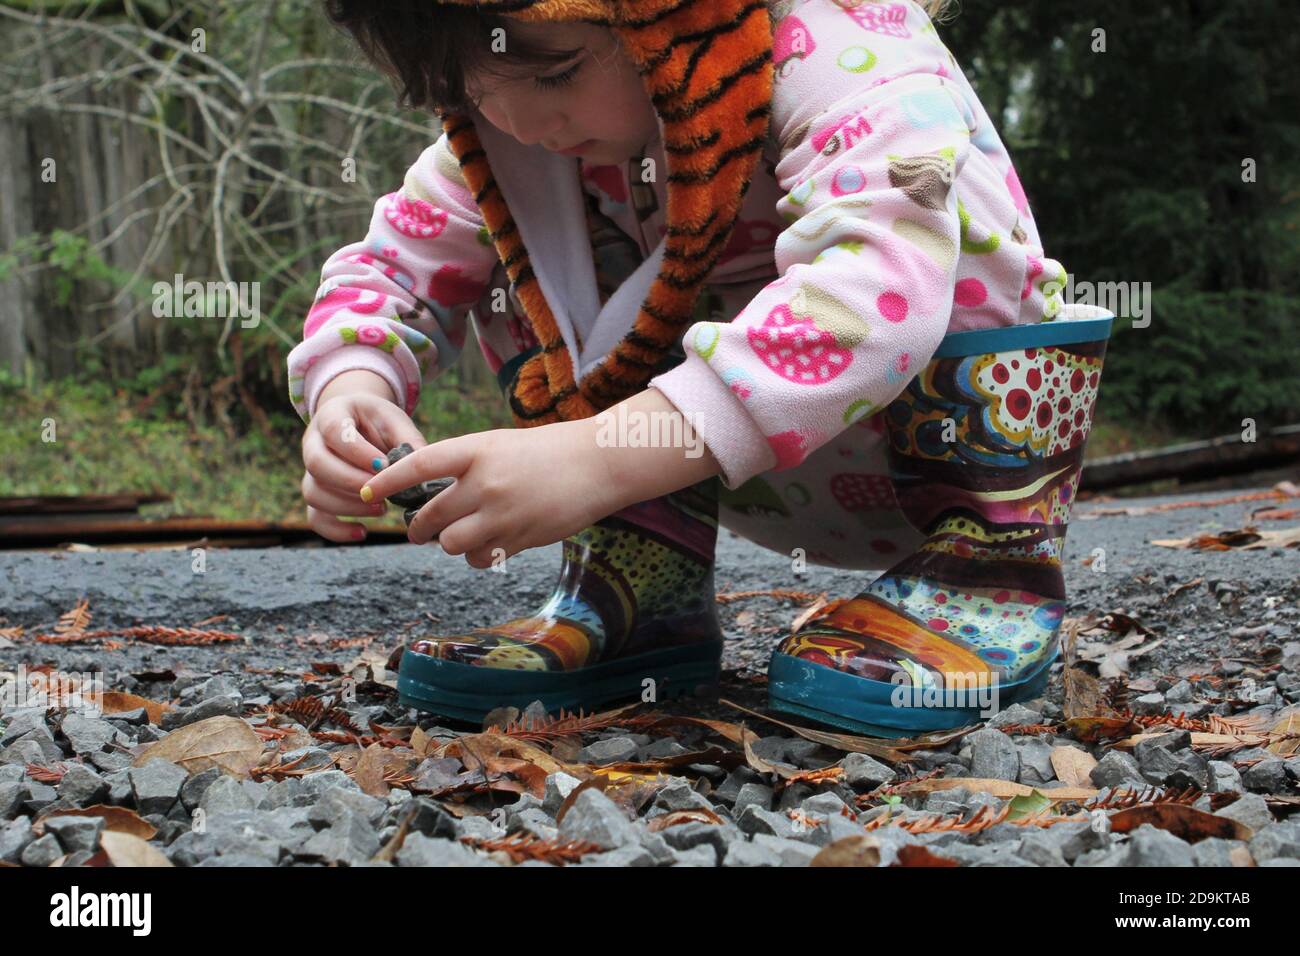 A young girl crouched and looking at rocks and other things on the ground. Stock Photo